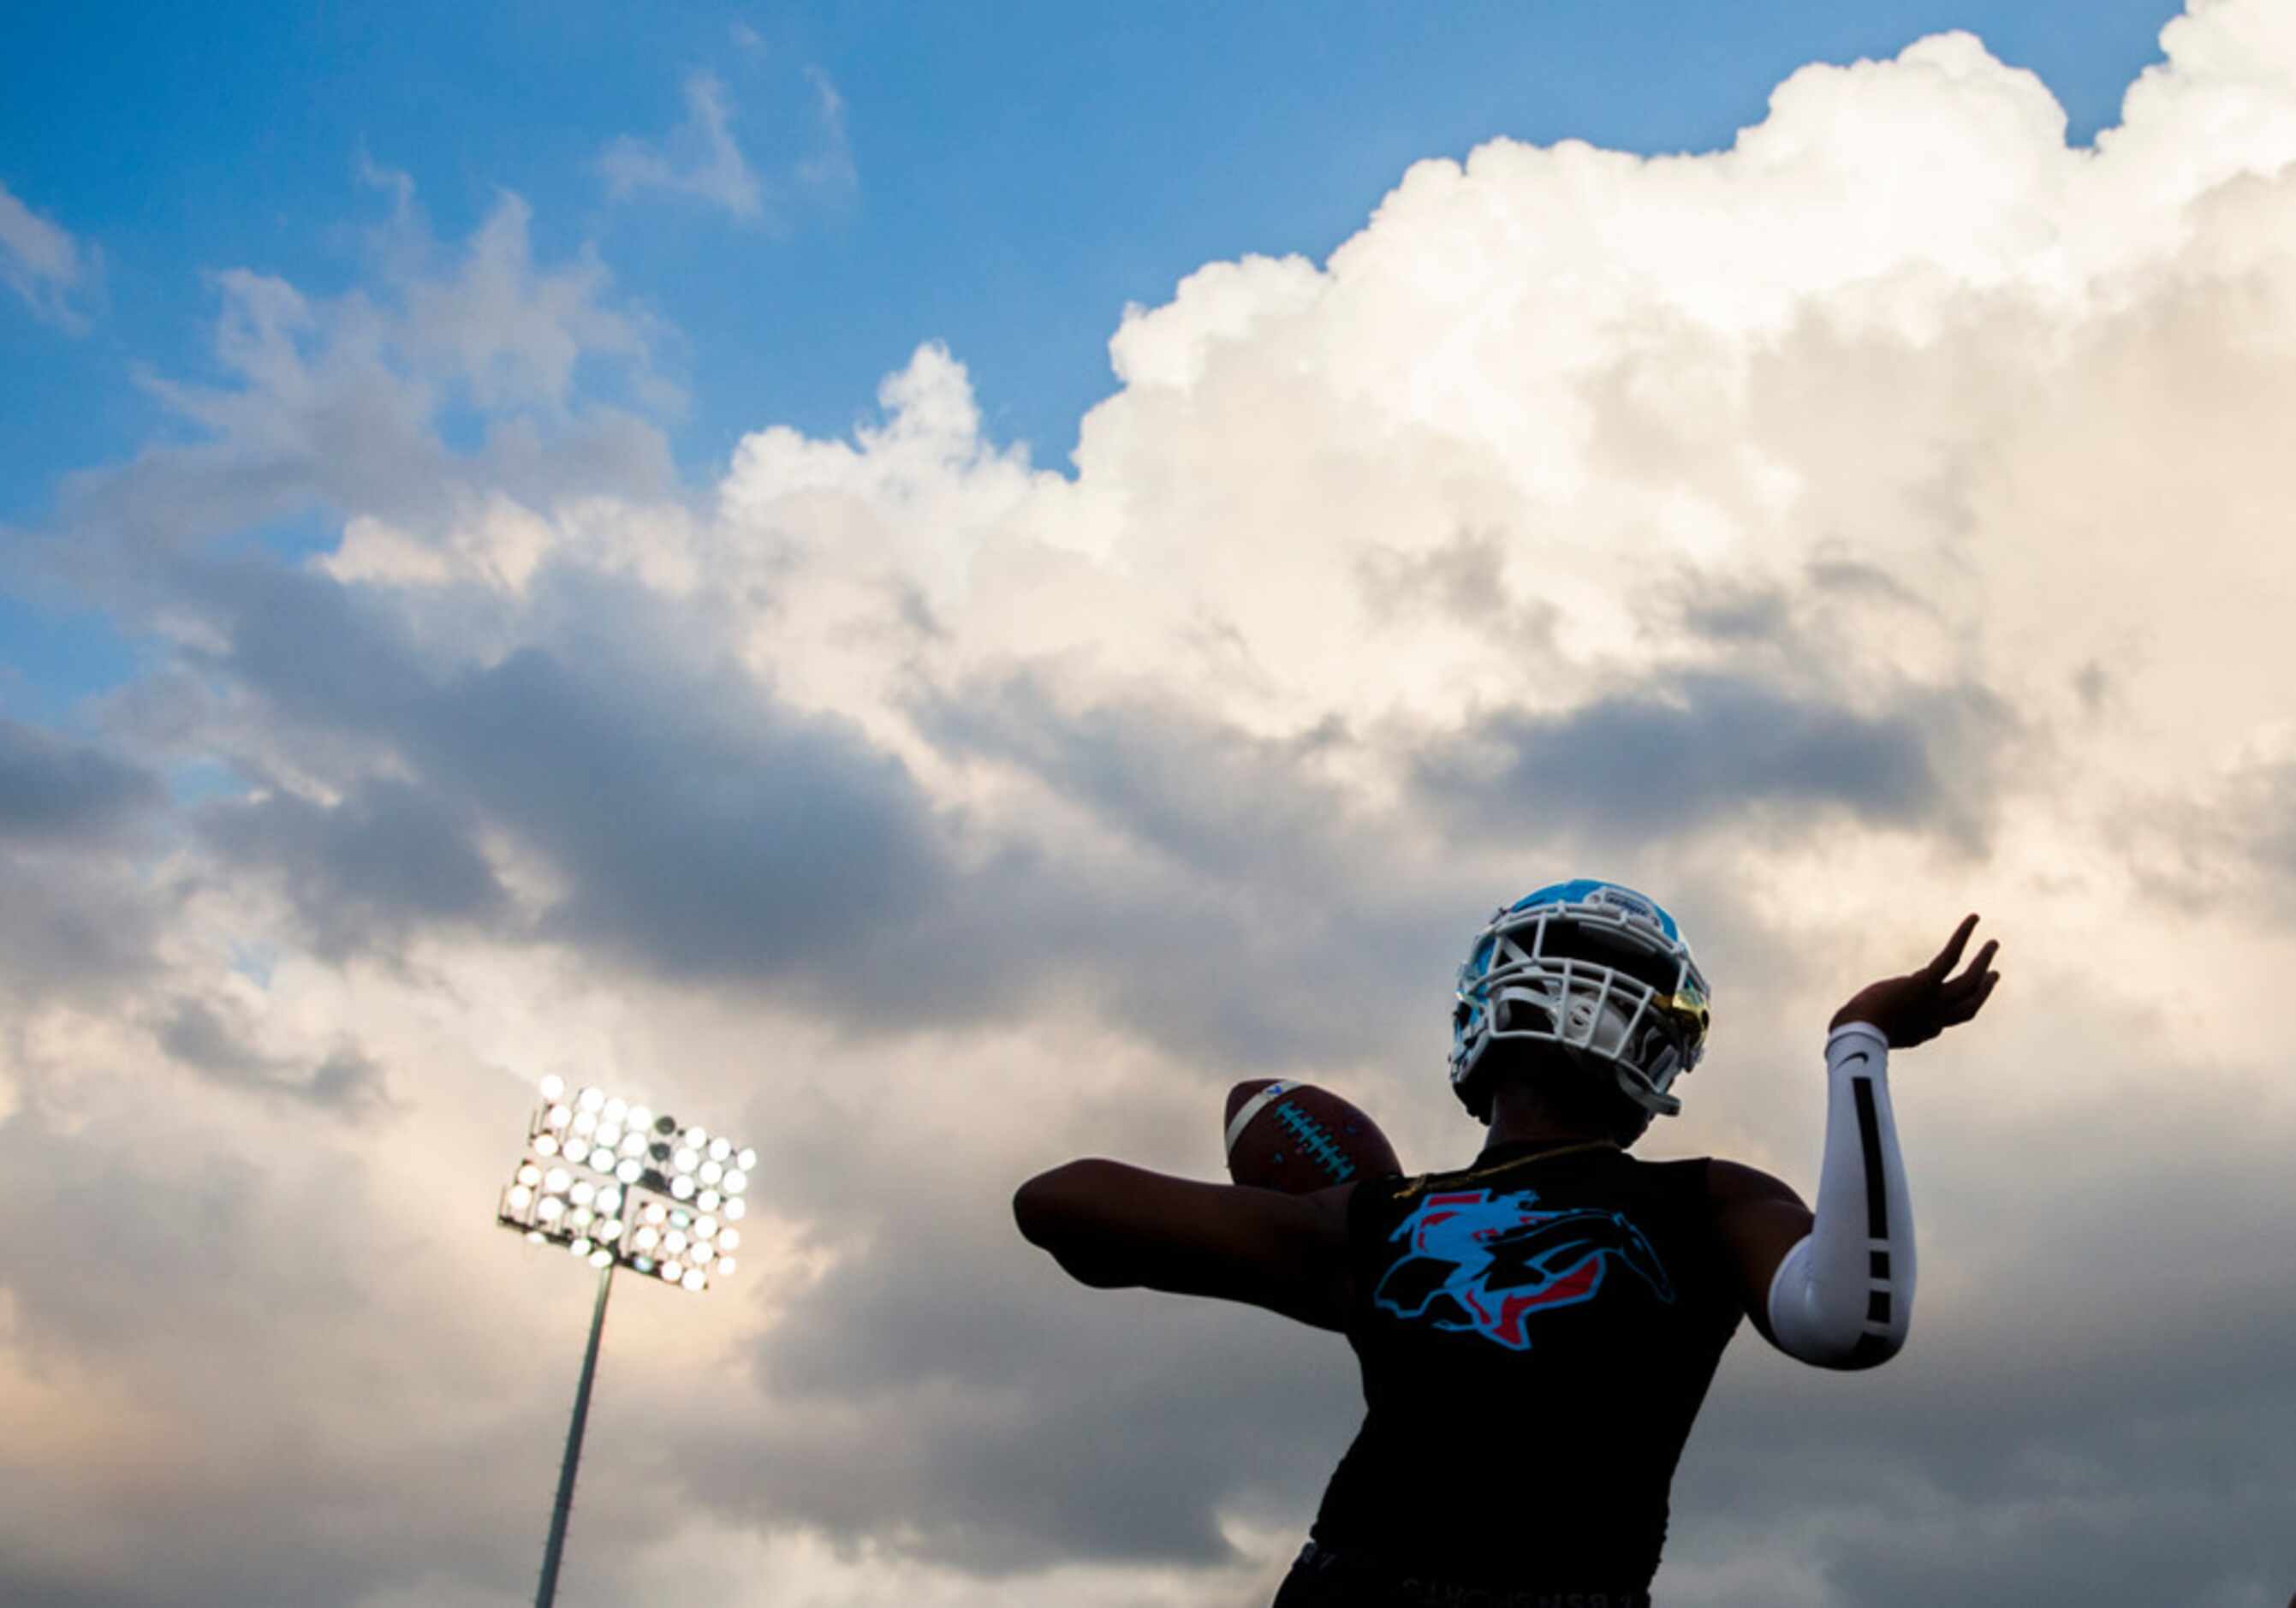 A Skyline football player warms up before a high school football game between Skyline and...